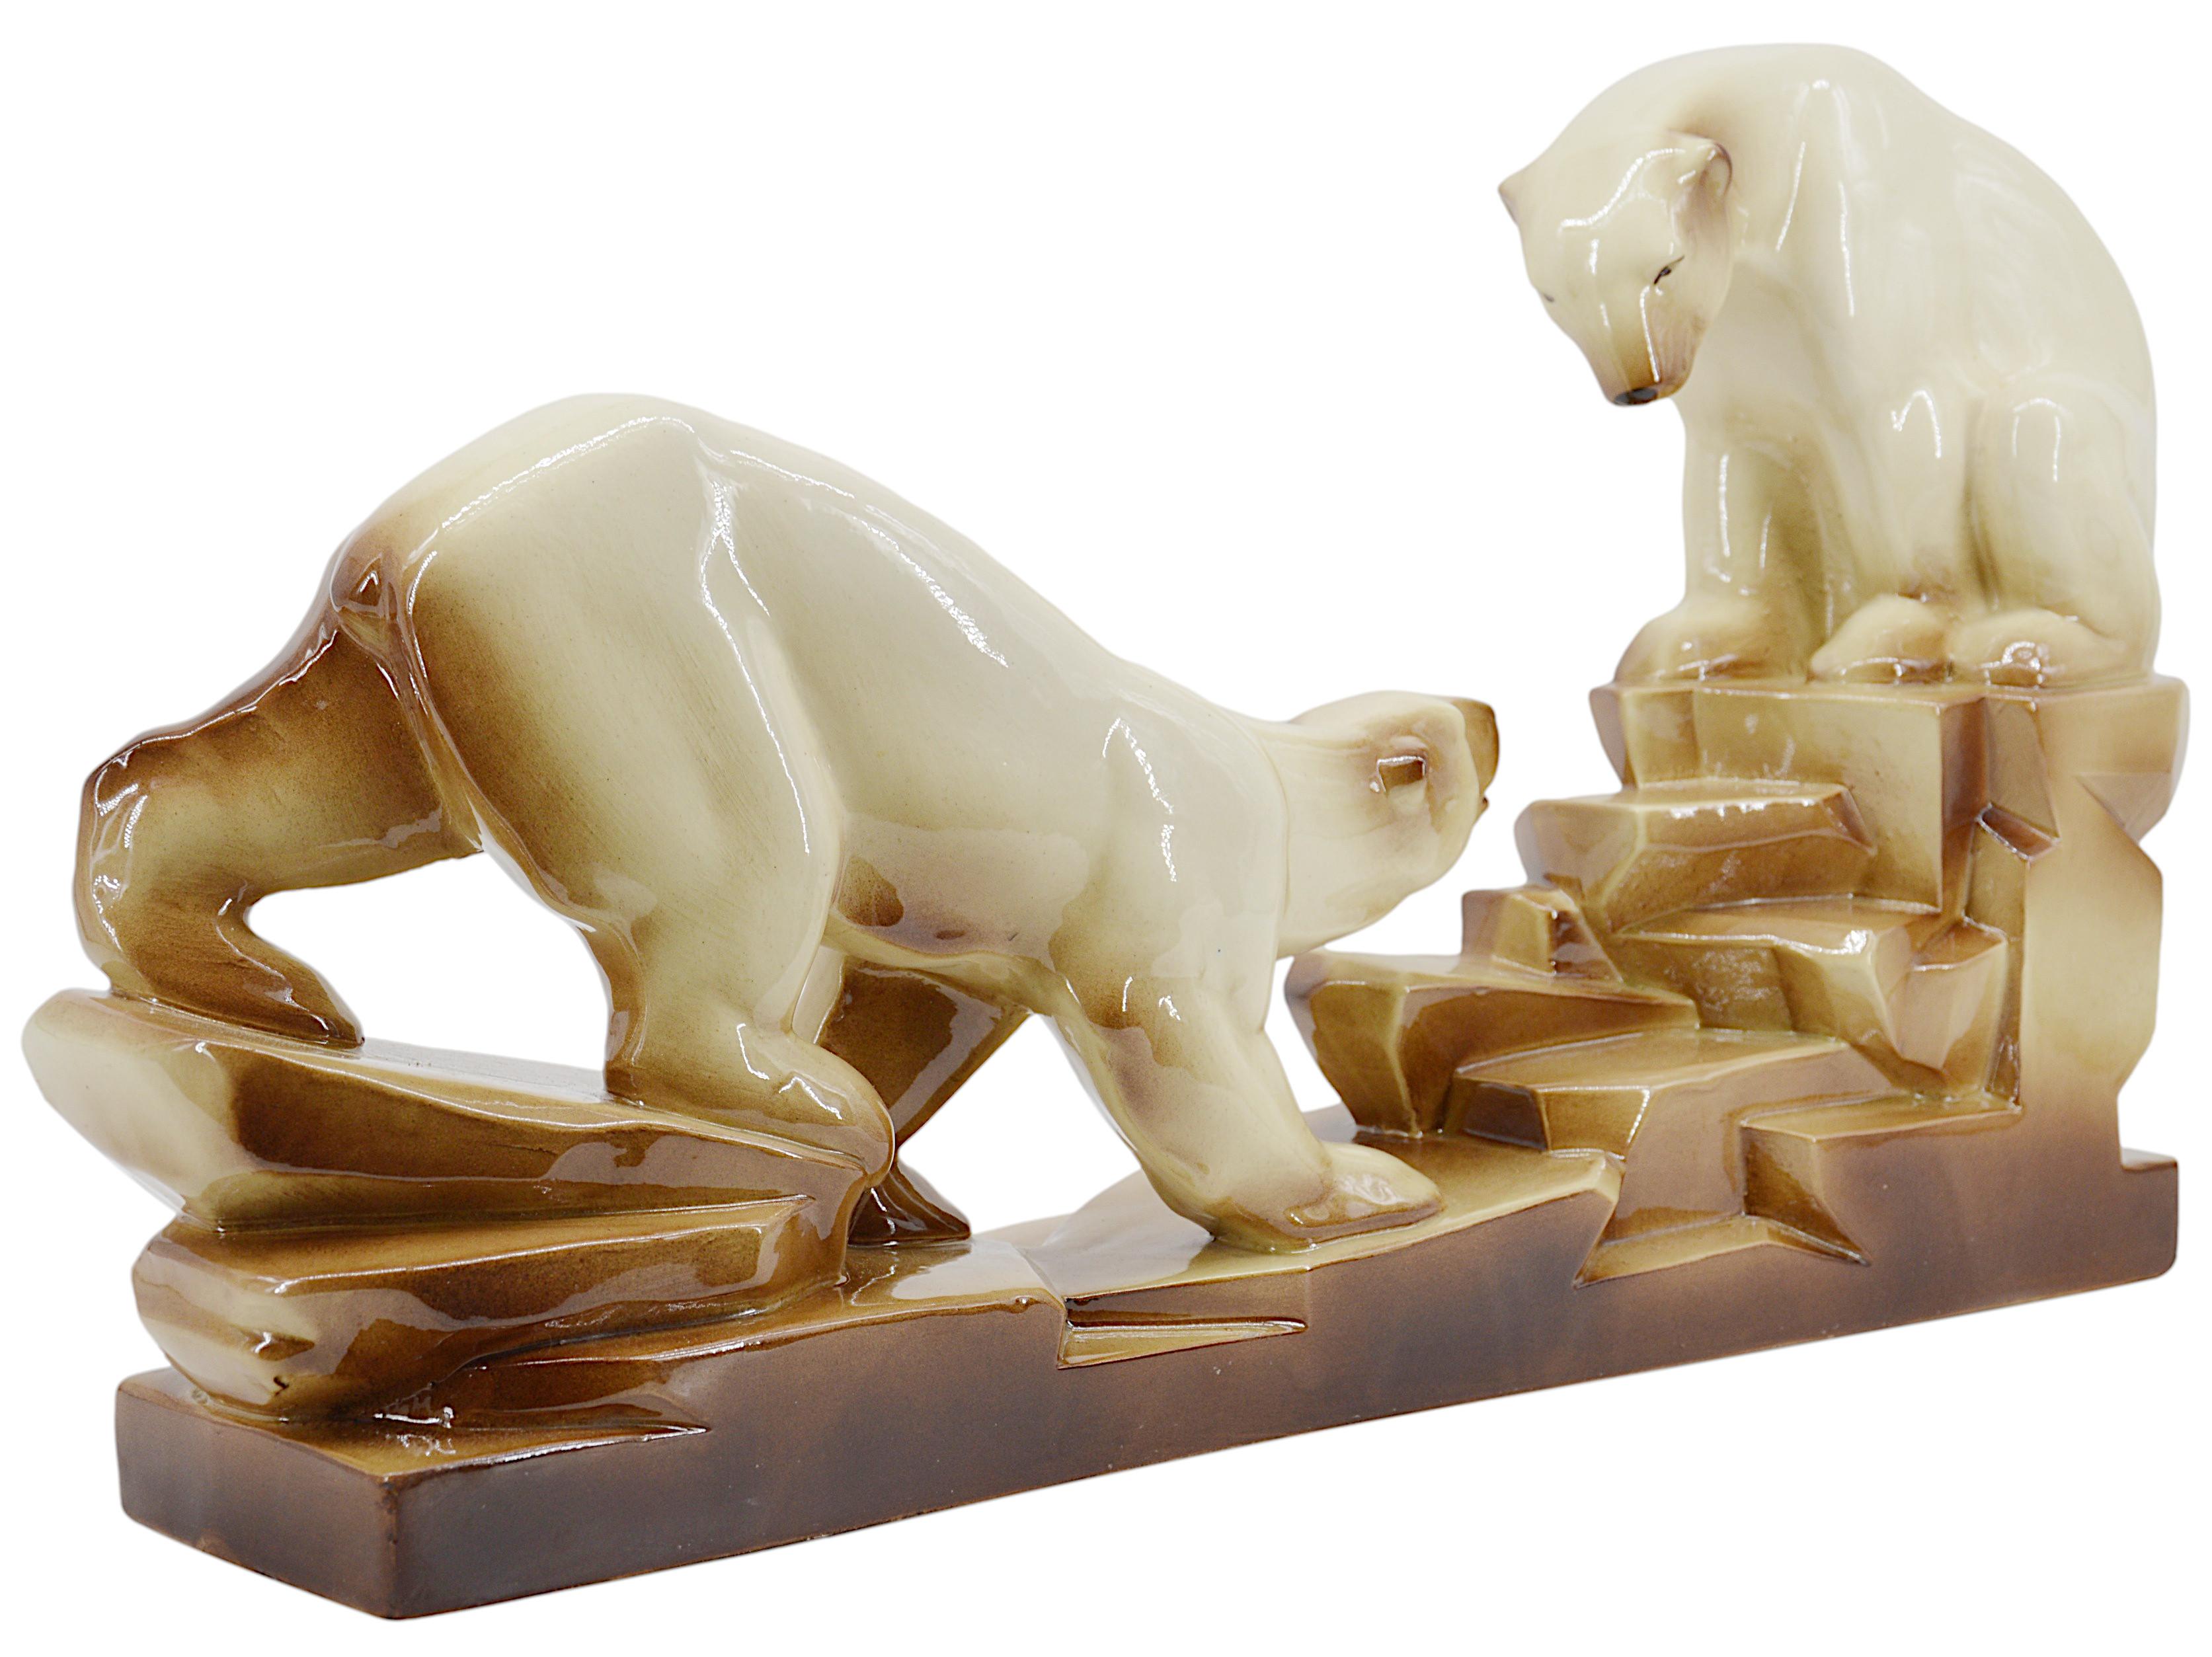 Couple of bears by Charles LEMANCEAU at Sainte-Radegonde's, France, ca.1935. French Art Deco ceramic. This model is named 